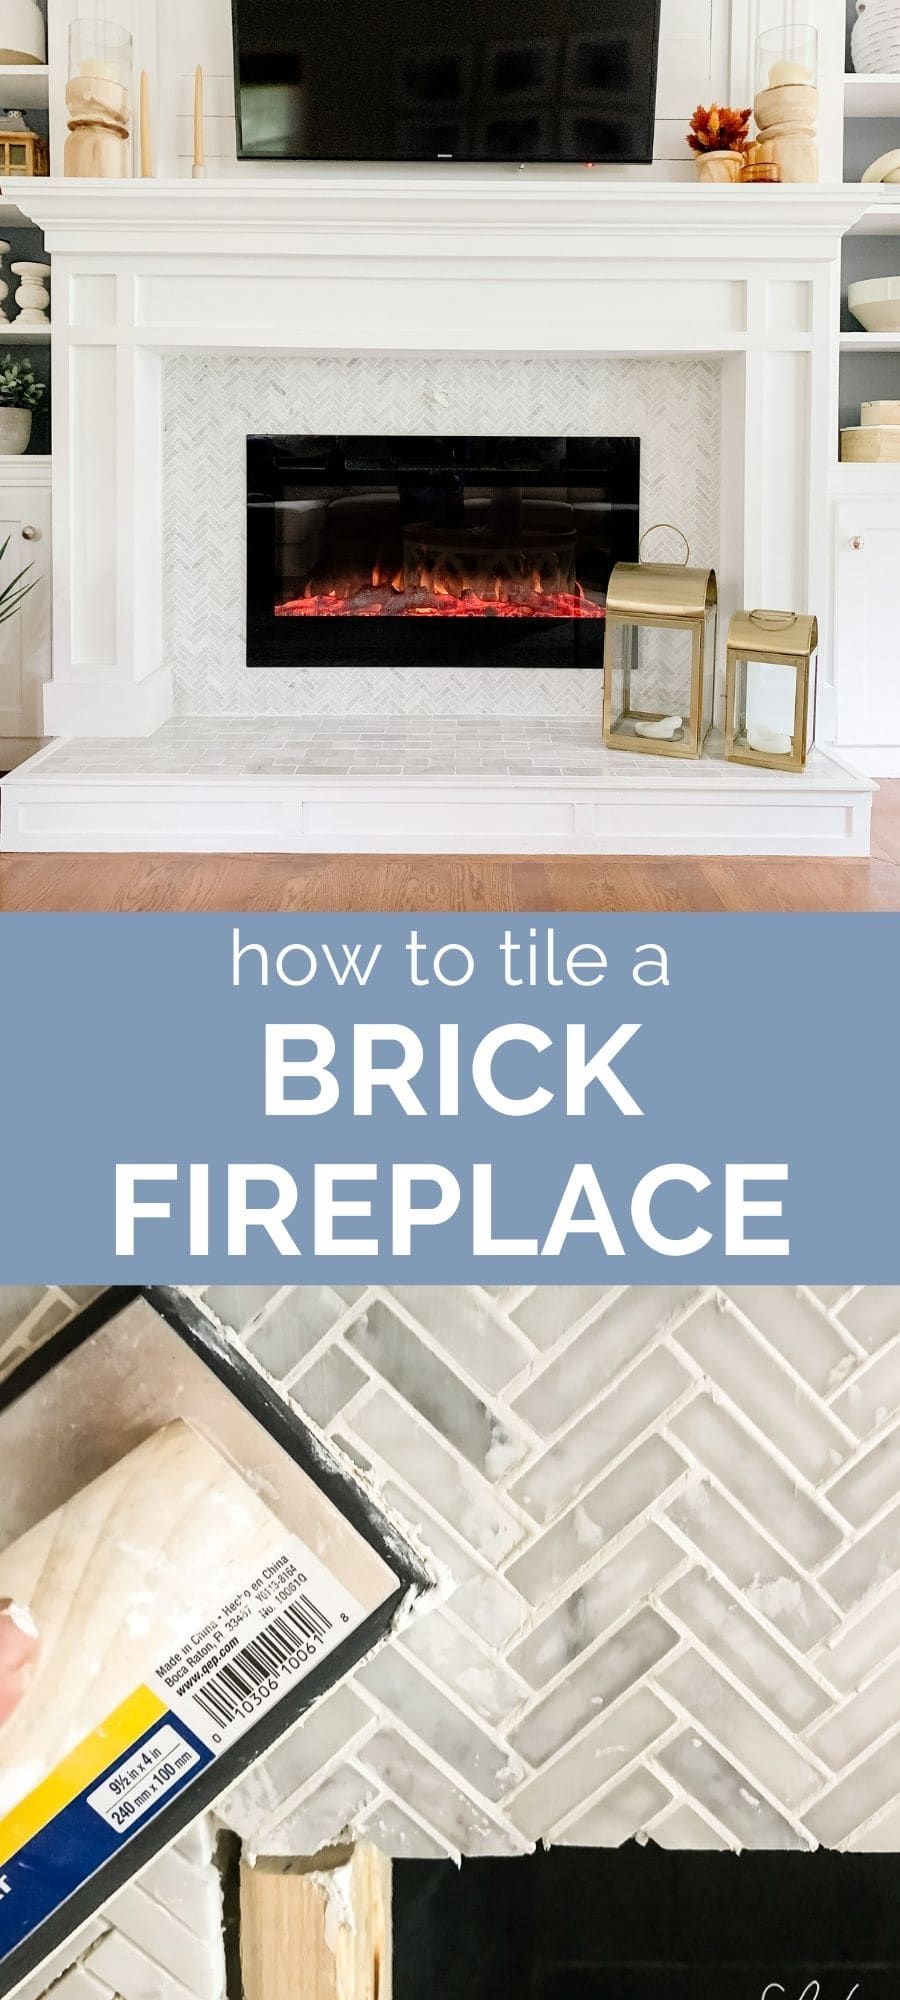 how to tile a brick fireplace